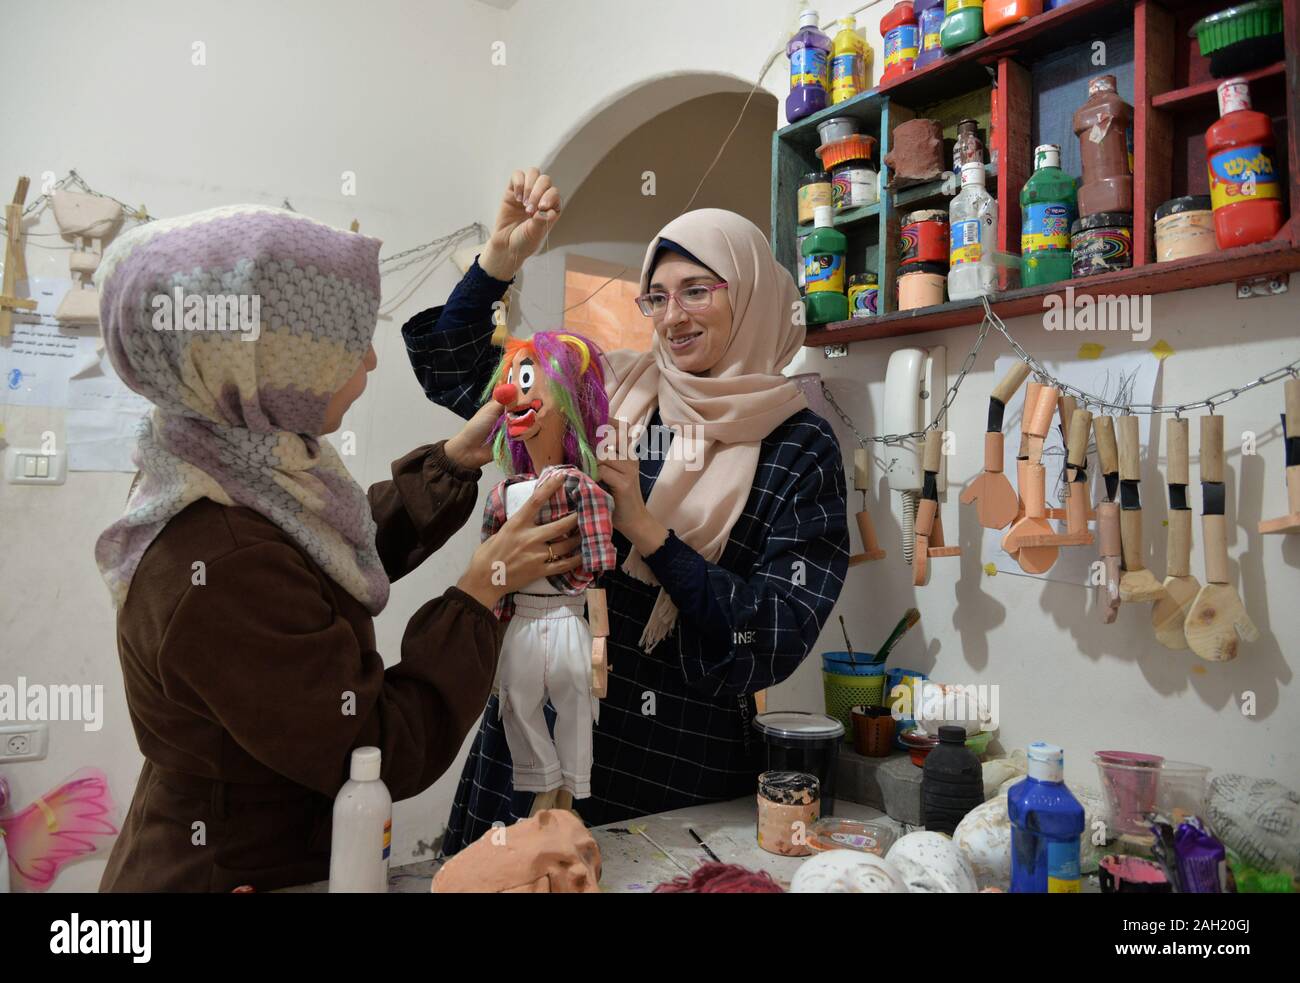 Gaza. 23rd Dec, 2019. Two Palestinian girls work on a marionette at Mahdi Karira's office in Gaza City, on Dec. 23, 2019. Mahdi Karira, a 39-year-old master at making the marionette, spent 6 months on training a group of 8 girls and 2 young men to make puppets and perform puppet theater shows for children, in an attempt to promote the art of puppet theater in the Gaza Strip. Credit: Rizek Abdeljawad/Xinhua/Alamy Live News Stock Photo